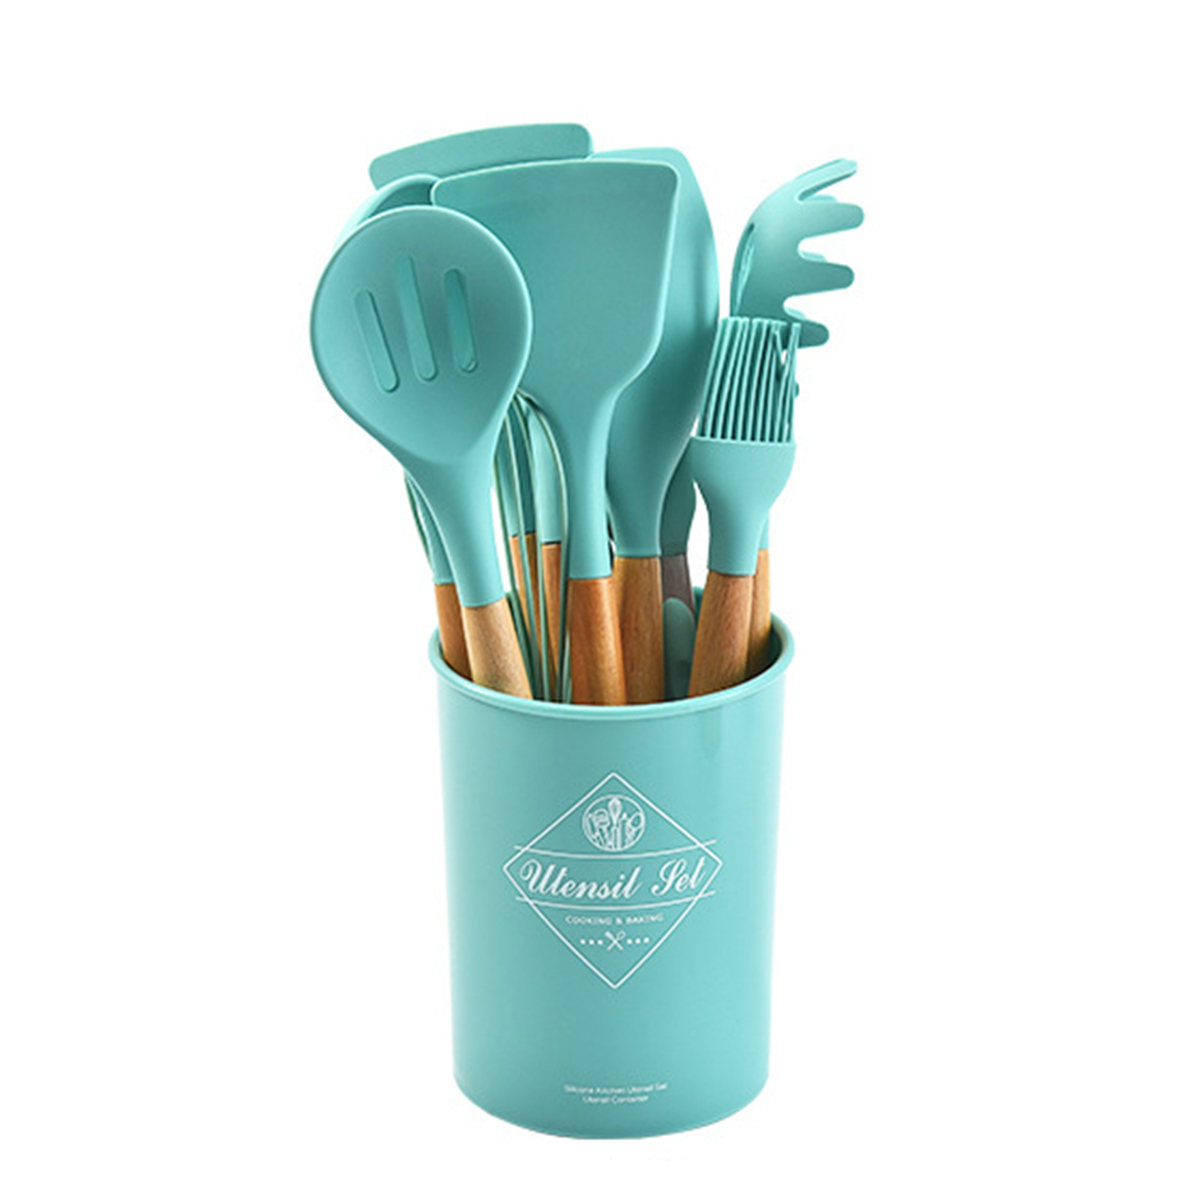 12-Pcs-Tableware-Set-Silicone-Wooden-Handle-Flatware-Spoon-Tongs-Whisk-Brush-with-Storage-Box-Outdoo-1812163-9